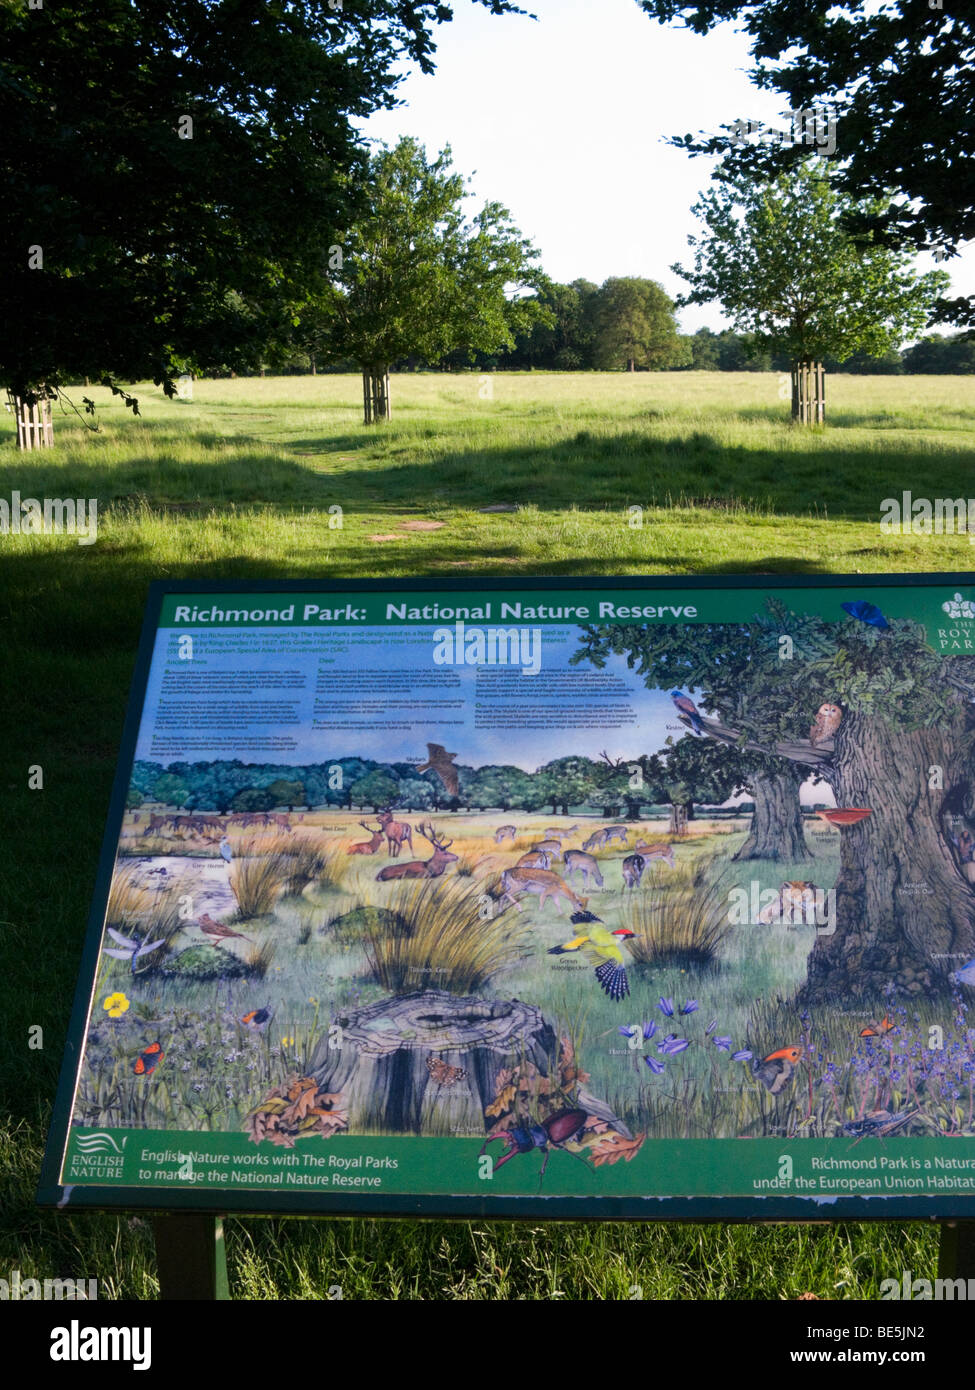 Displayed pictorial nature reserve guide / illustrated map of Richmond Park. UK. Stock Photo